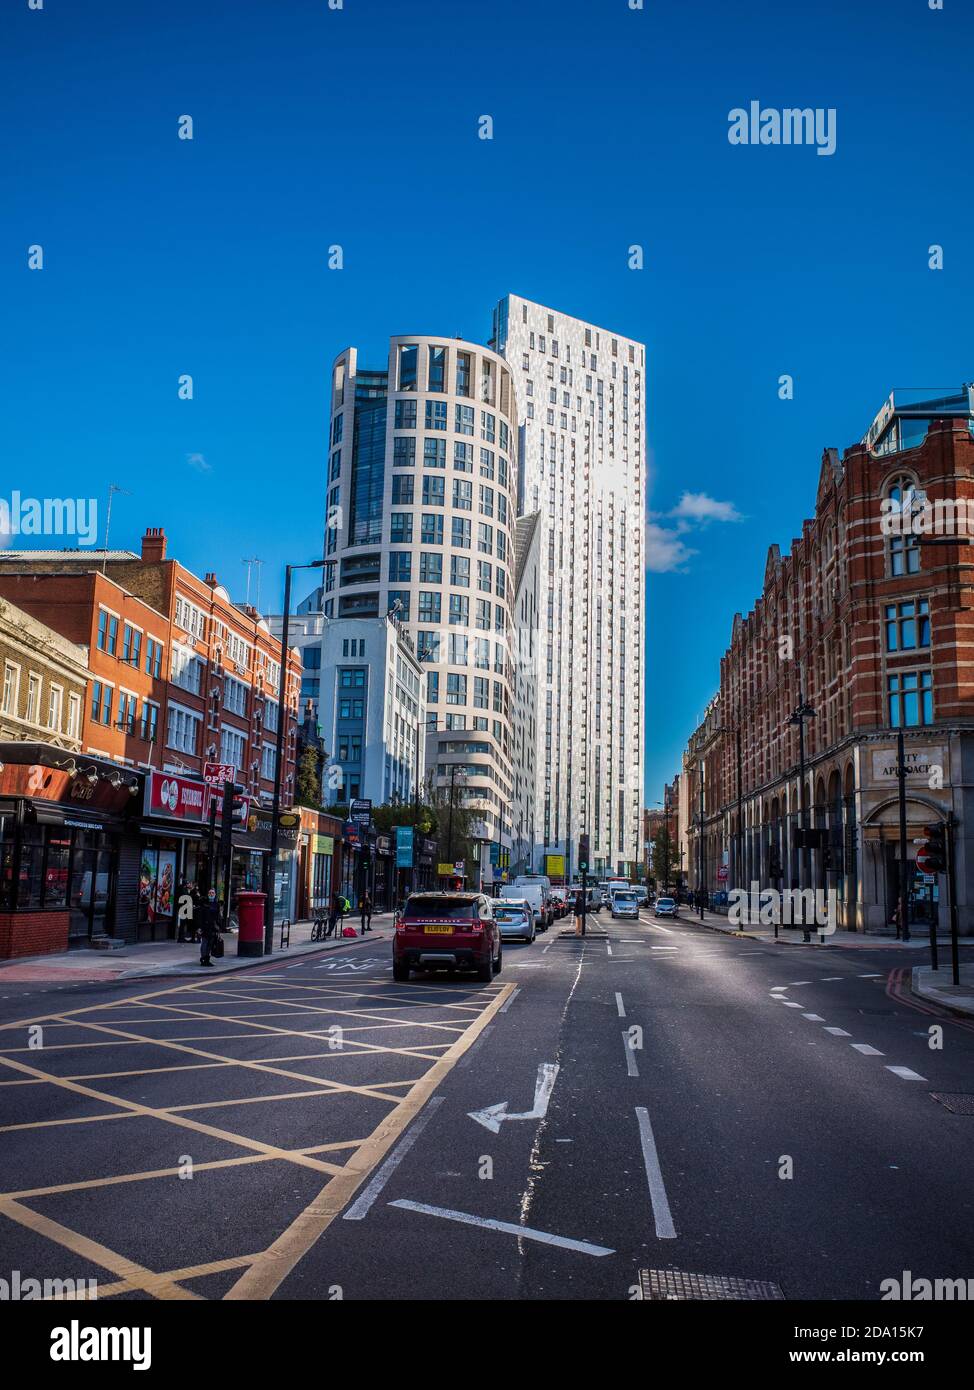 City Road London Richtung Silicon Roundabout und East London Tech City Area. Stockfoto